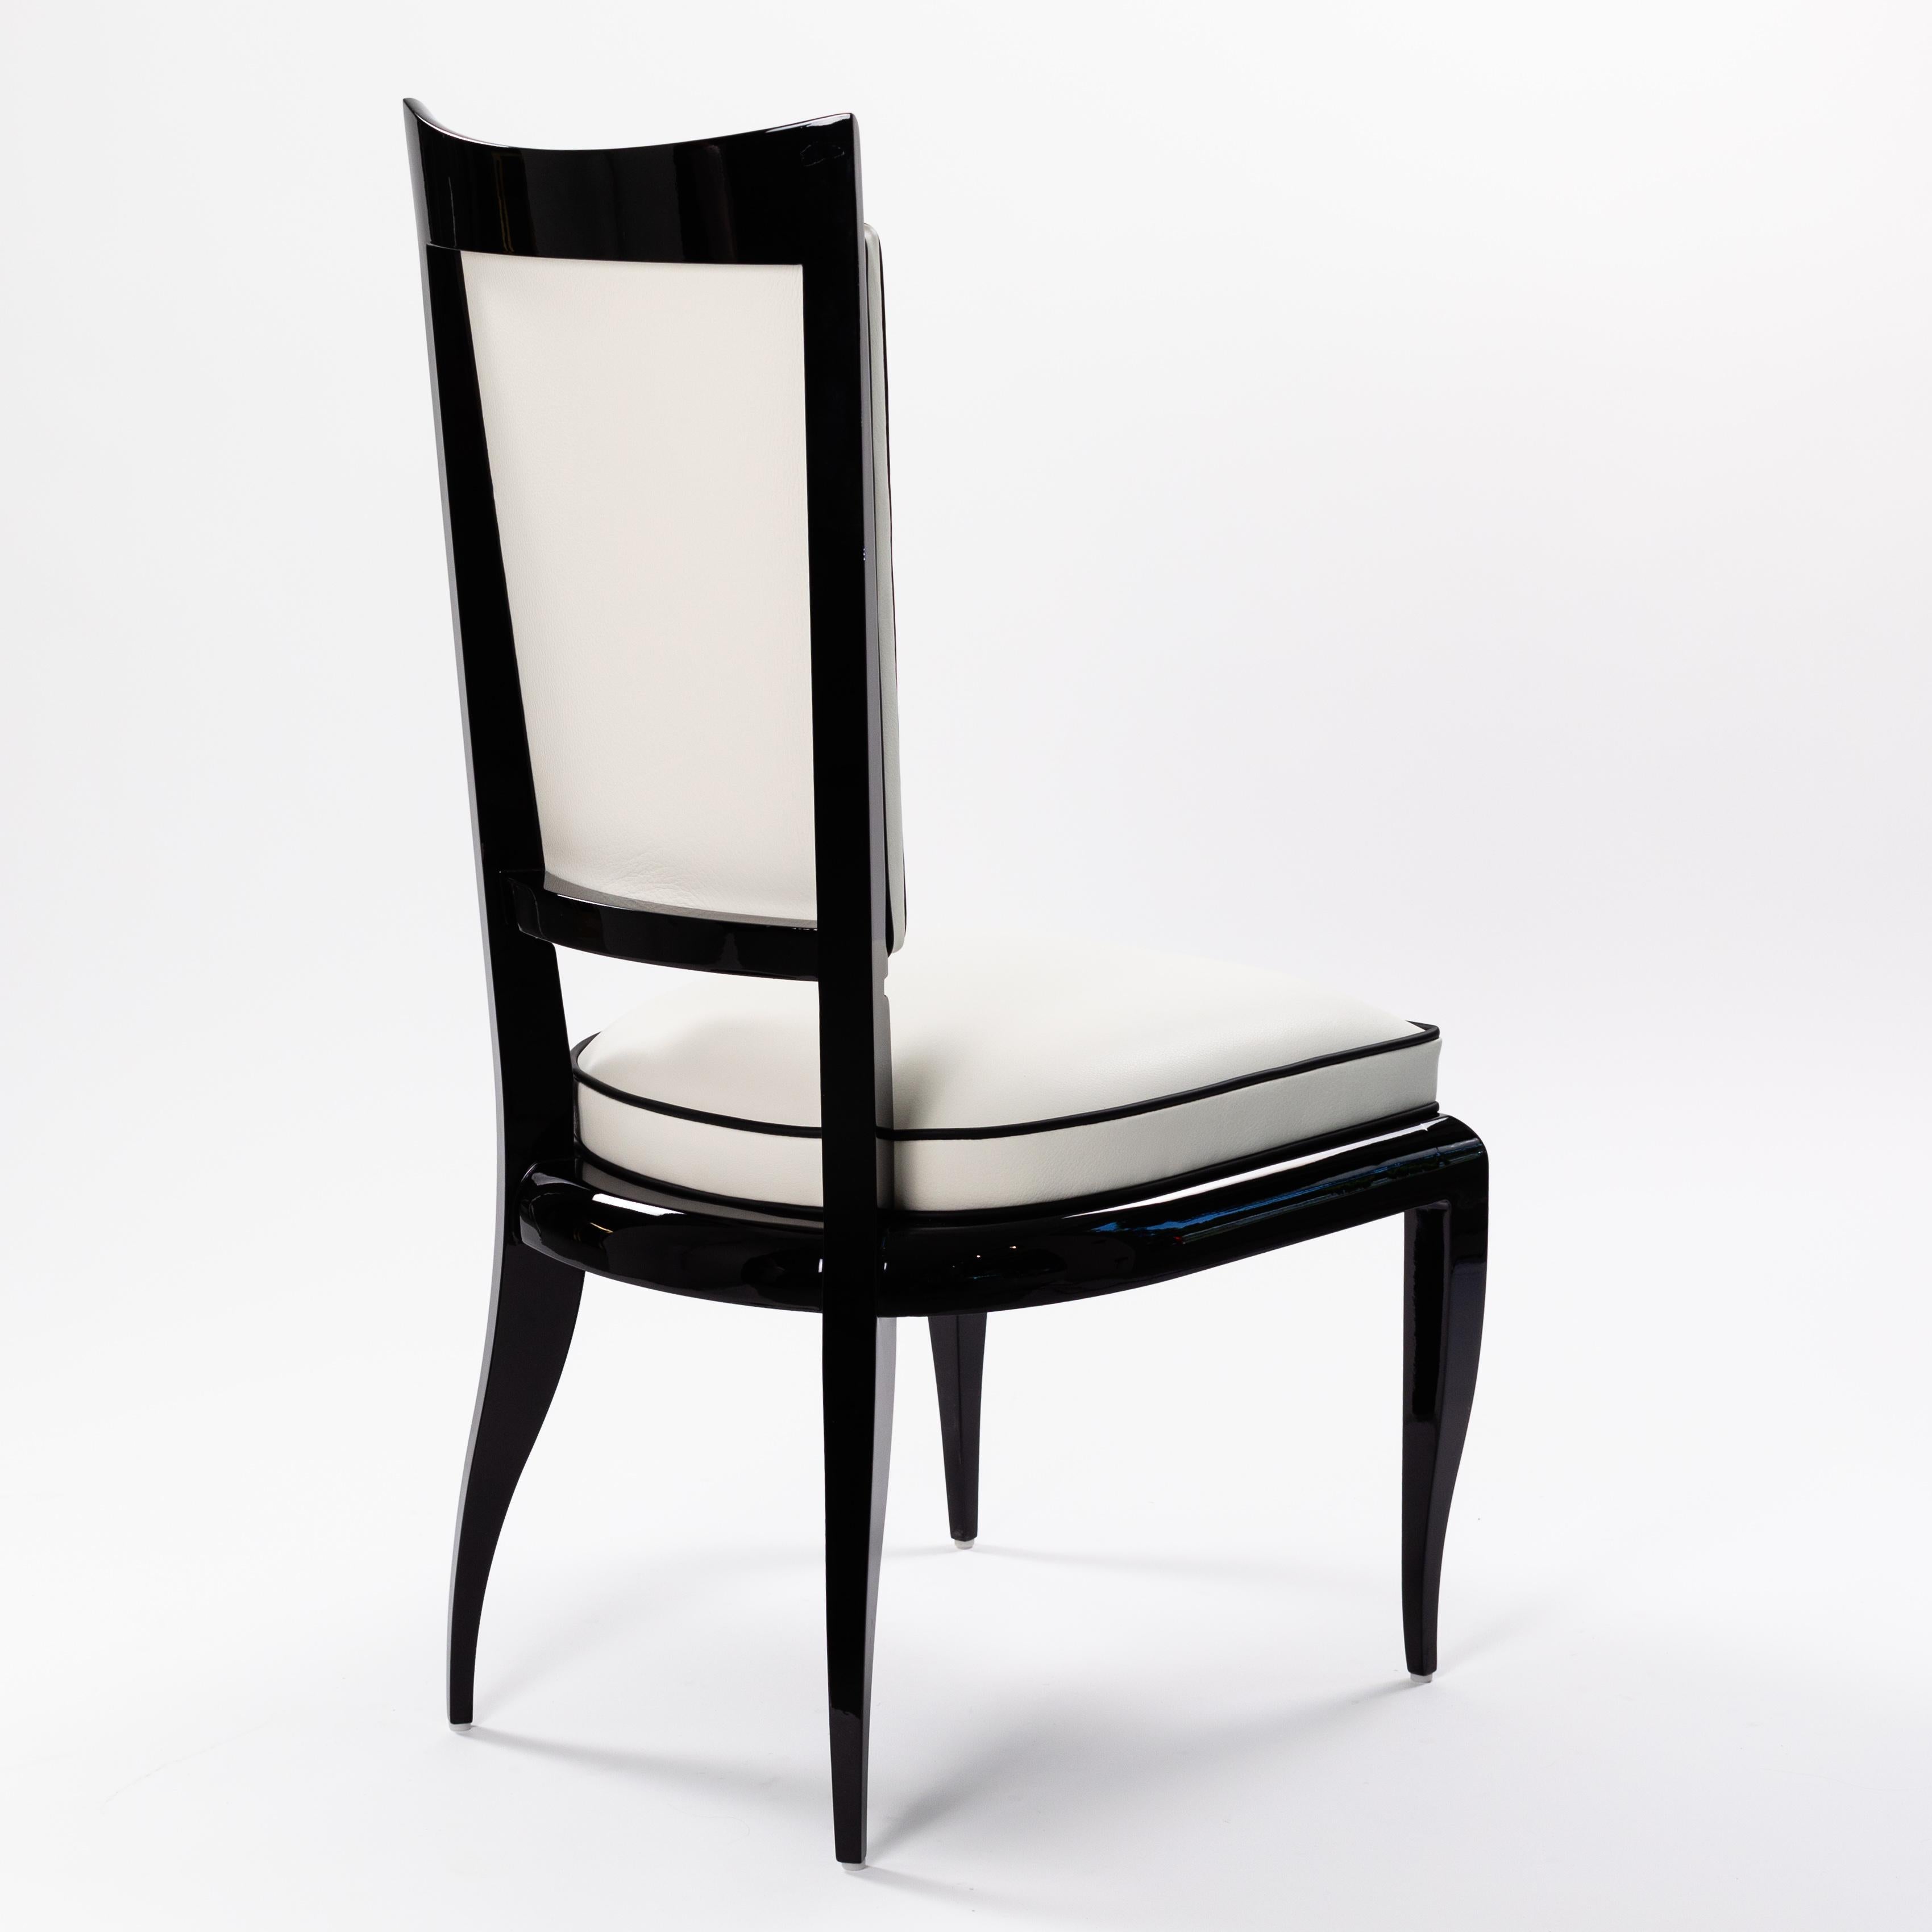 German Elegant High Back Art Déco Dining Room Chair Black Lacquer White Nappa Leather For Sale